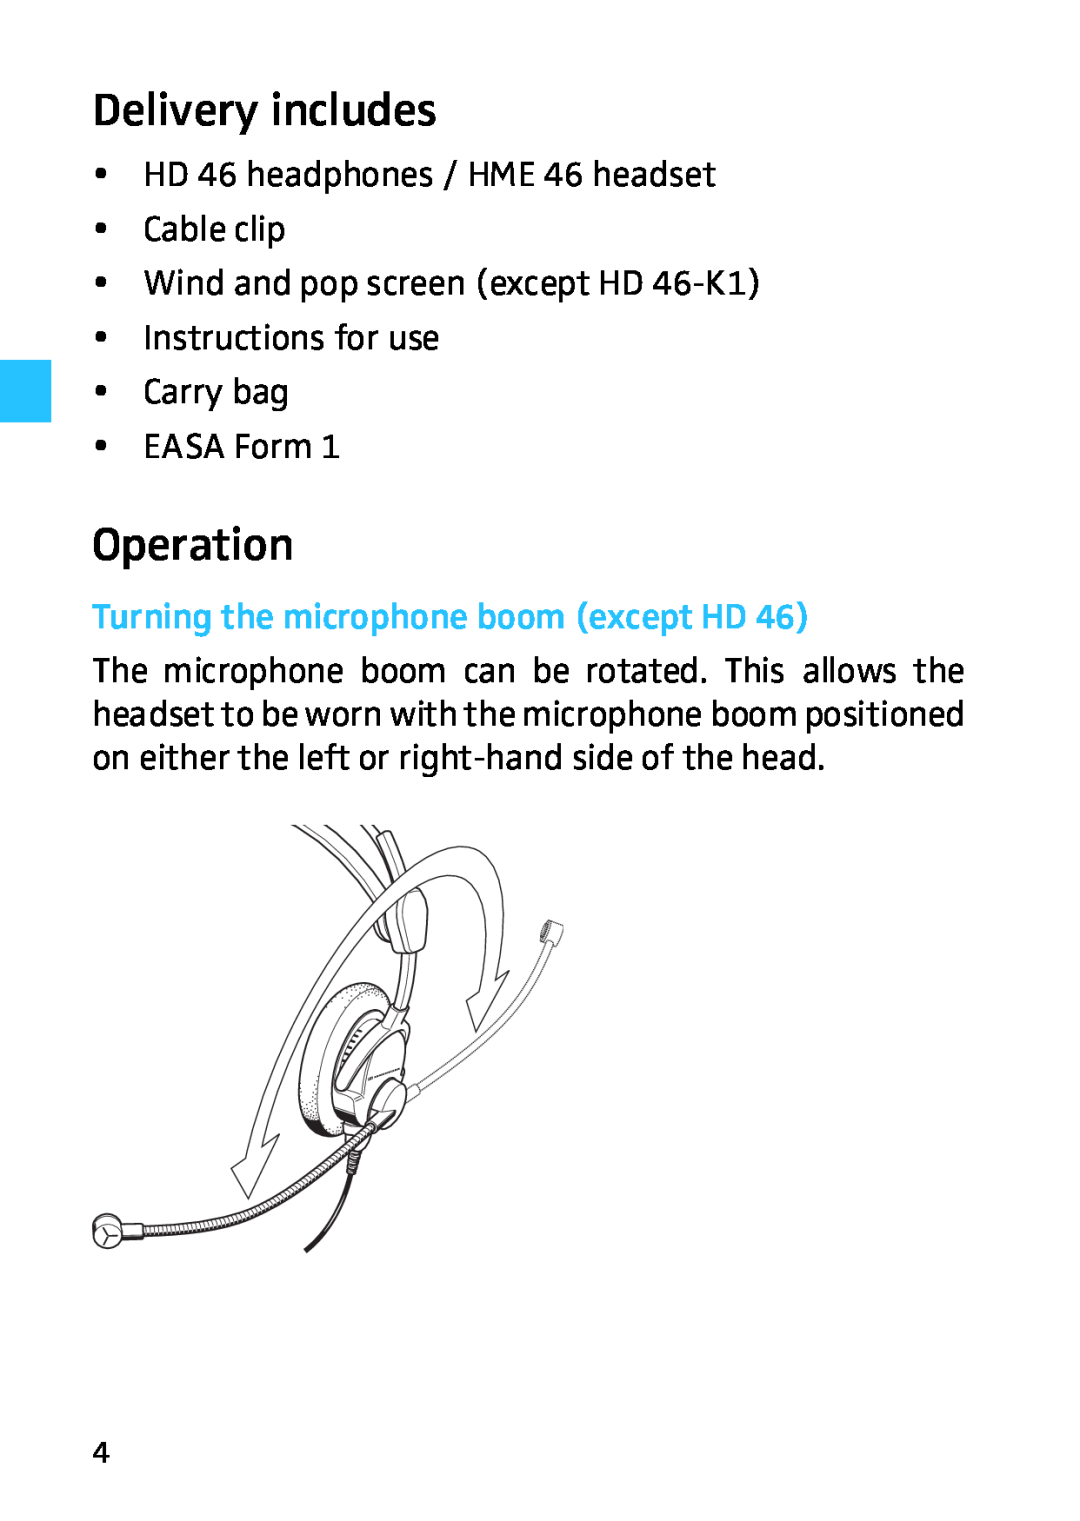 Sennheiser HD HME 46 manual Delivery includes, Operation, yHD 46 headphones / HME 46 headset yCable clip 